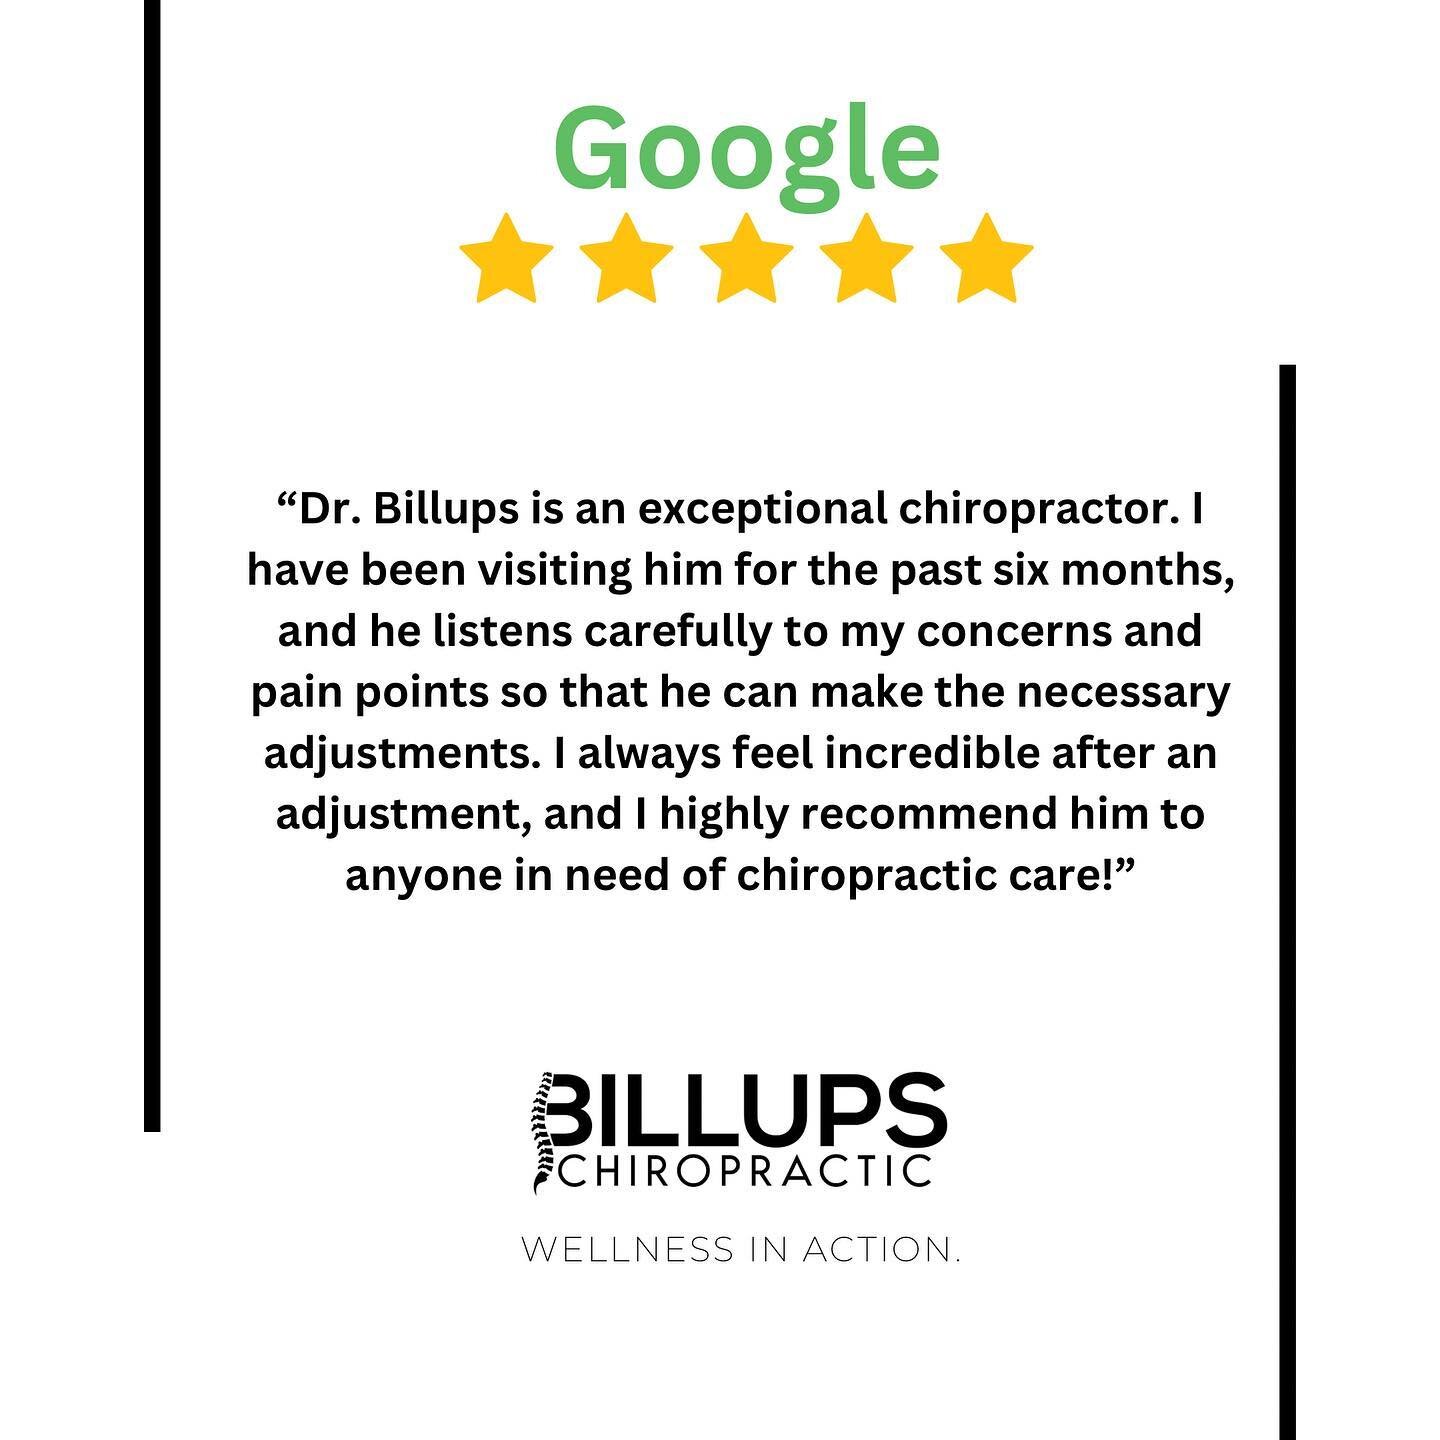 5-Star #Chiropractor on Google and Facebook!

Call or Text us if you or someone you love is looking for the same!
469-994-1111

Billups Chiropractic 
www.BillupsChiro.com

#DallasTx #FarmersBranchTx #FBTX
#google #facebook #review